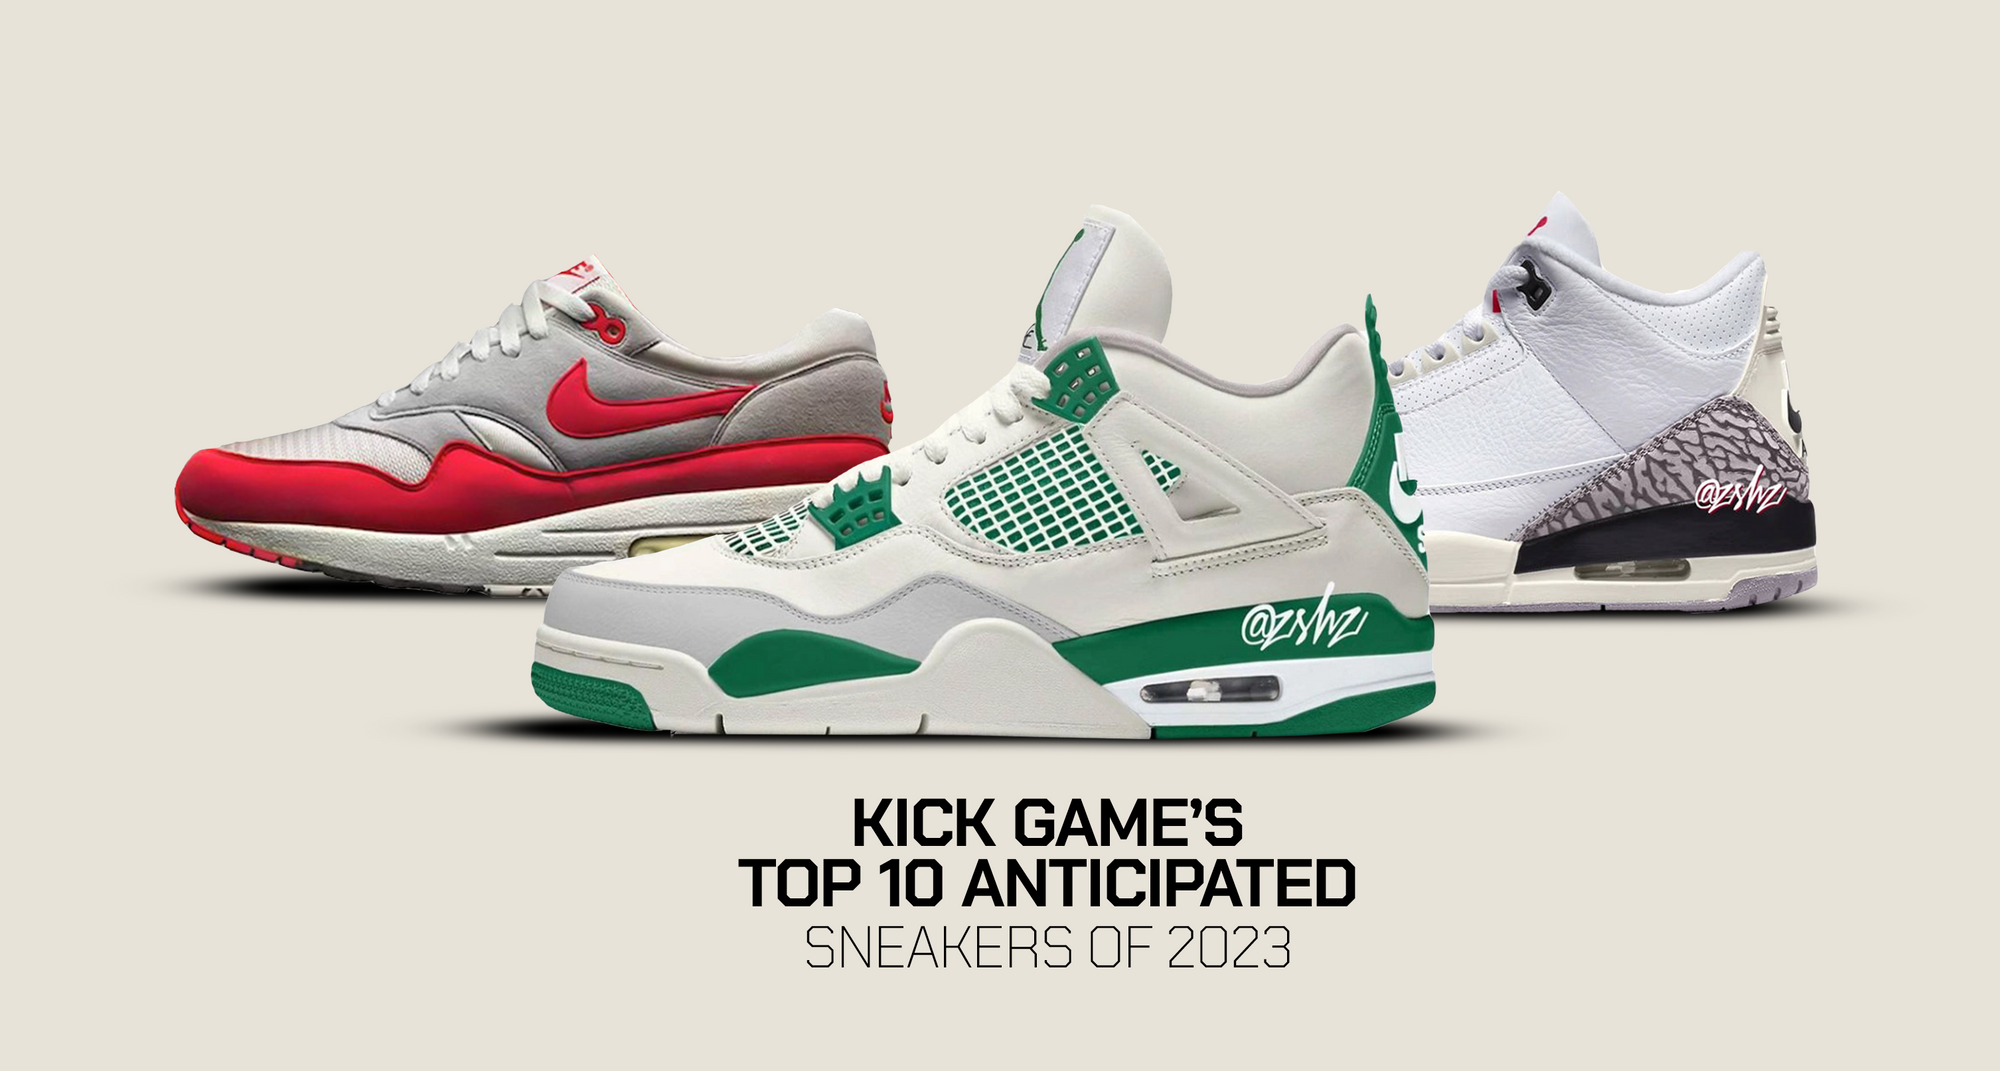 Kick Game’s Most Anticipated Sneakers of 2023